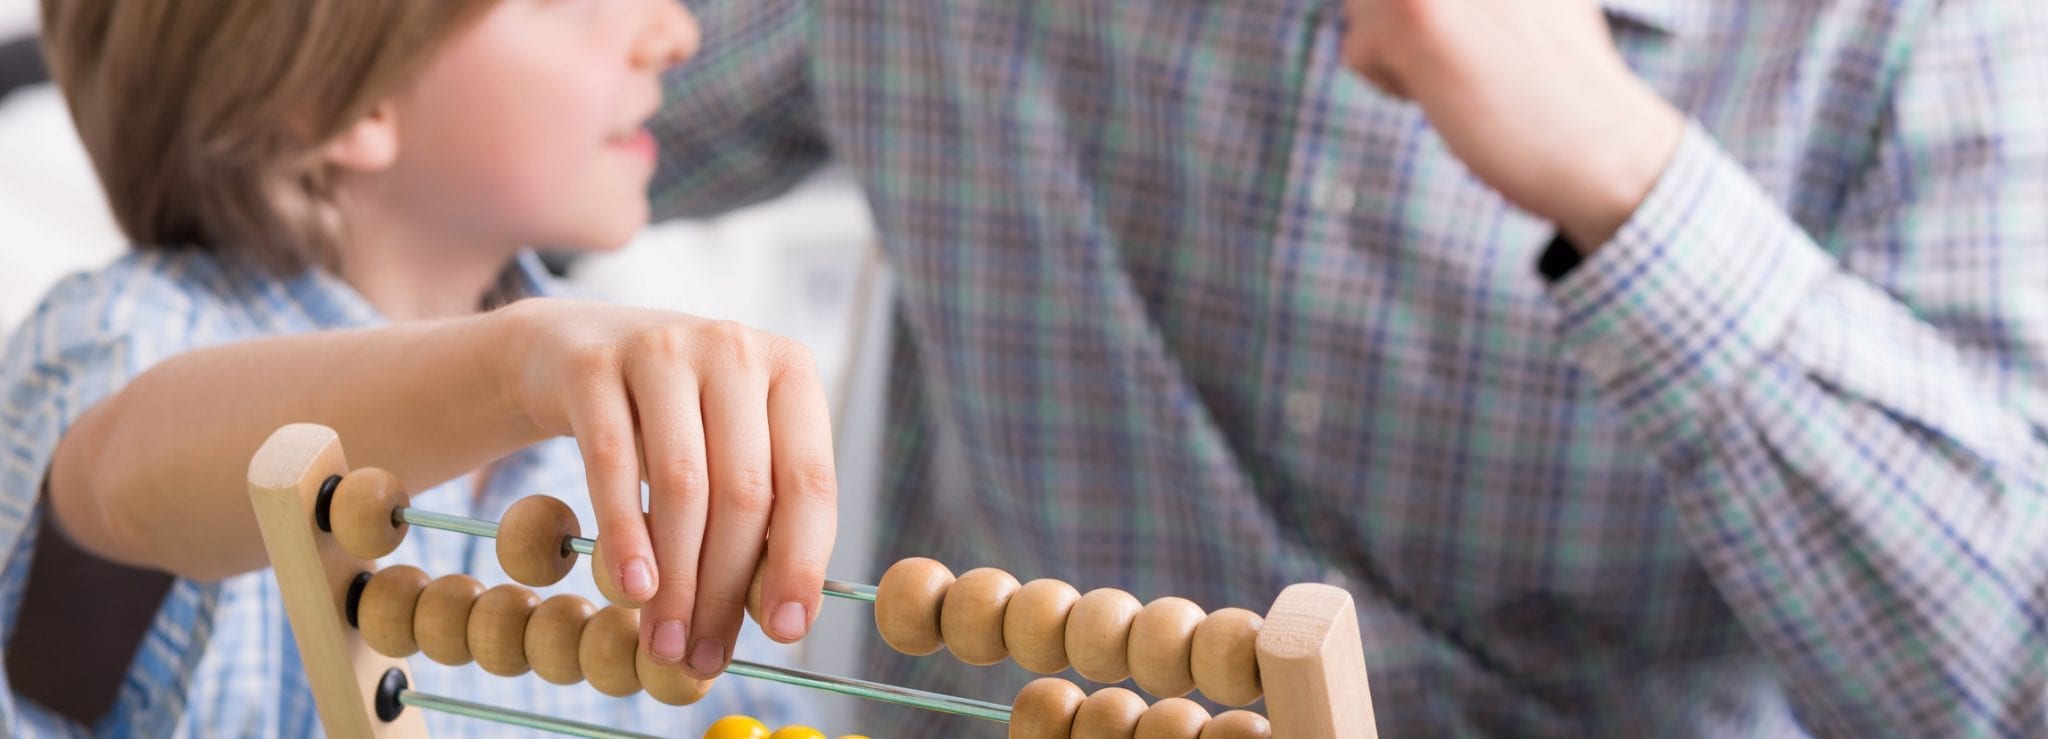 Child learning abacus